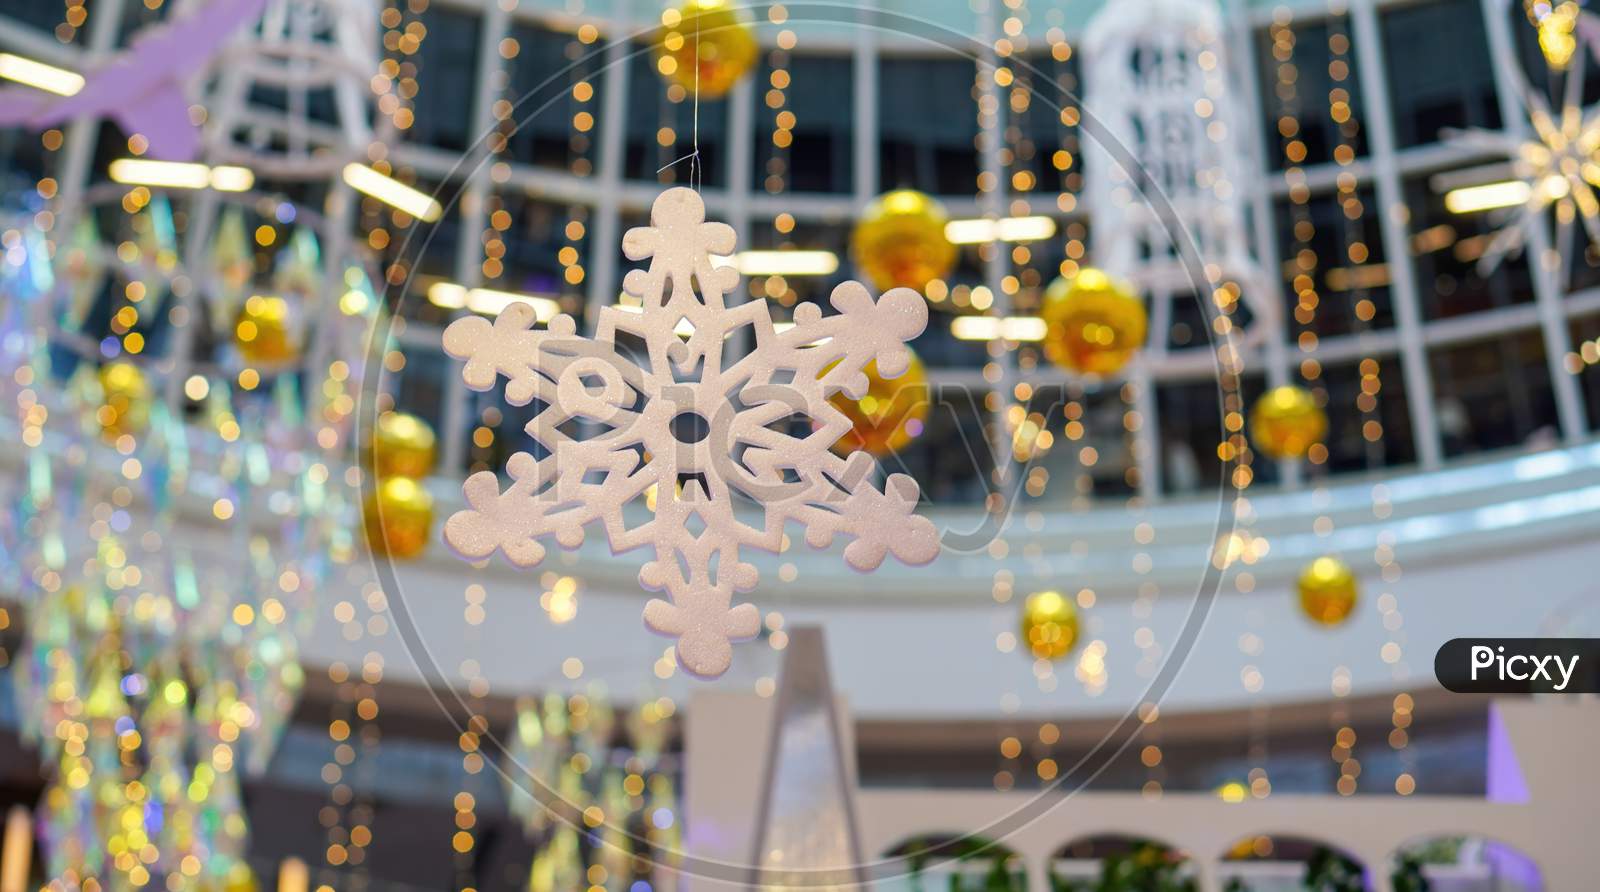 Frozen Symbol Decoration At Mall In Blur Background